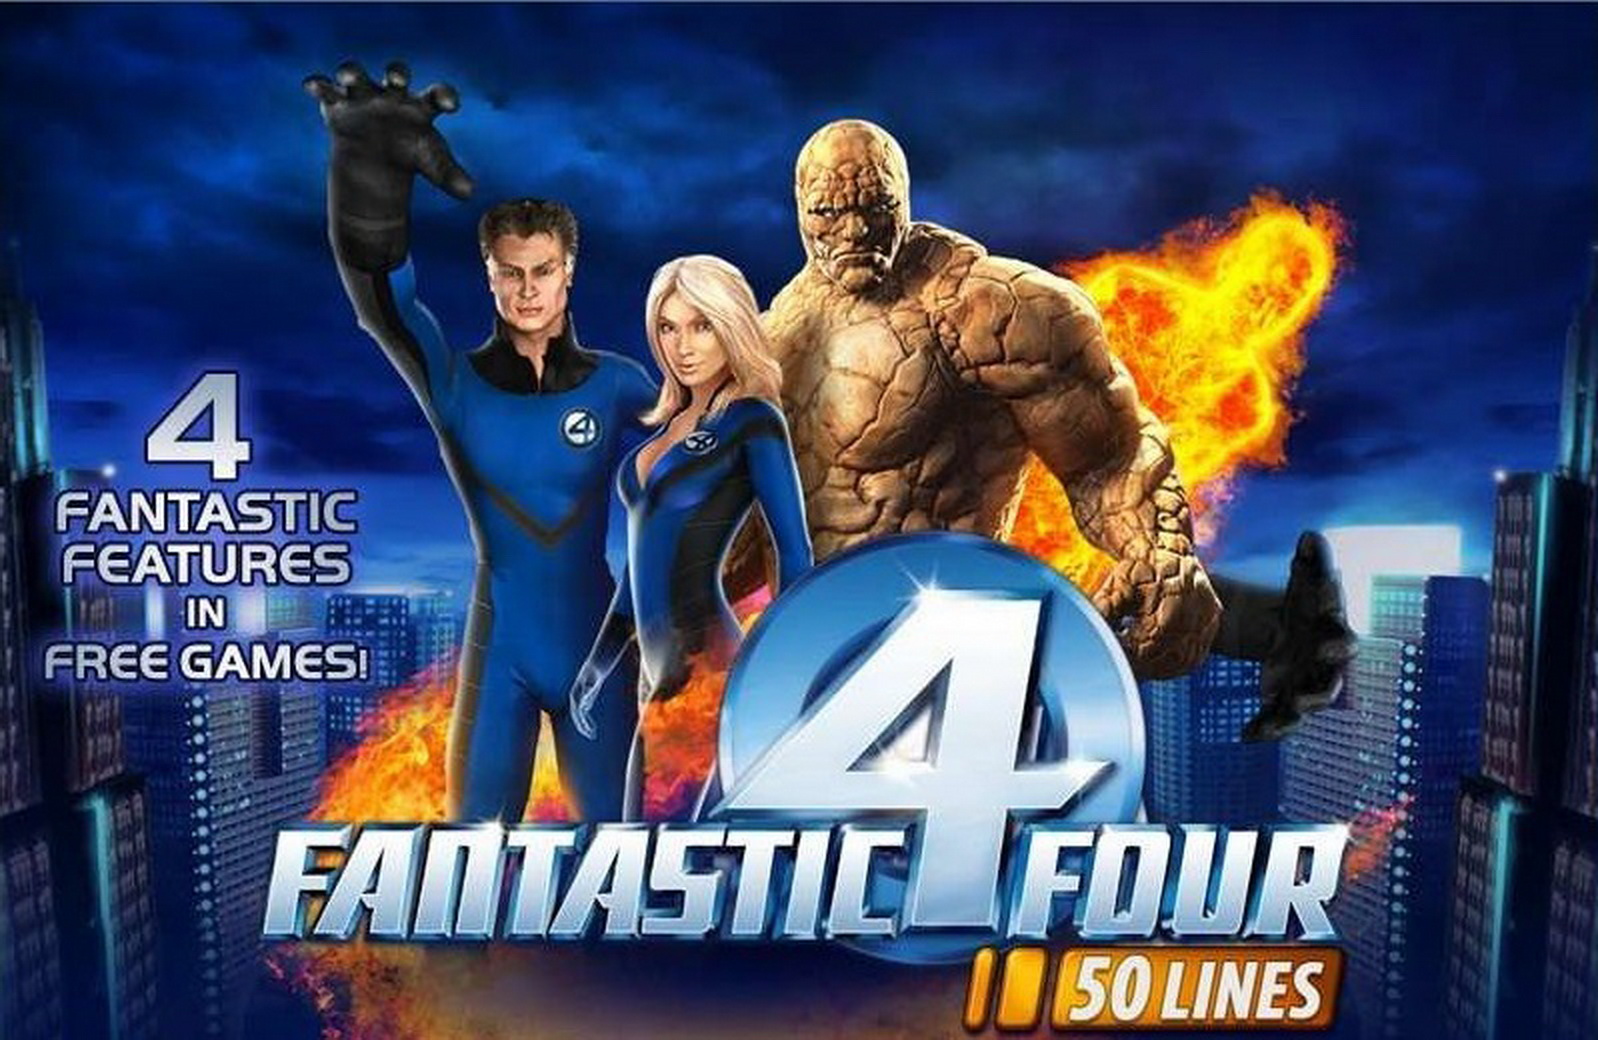 The Fantastic Four 50 lines Online Slot Demo Game by Playtech